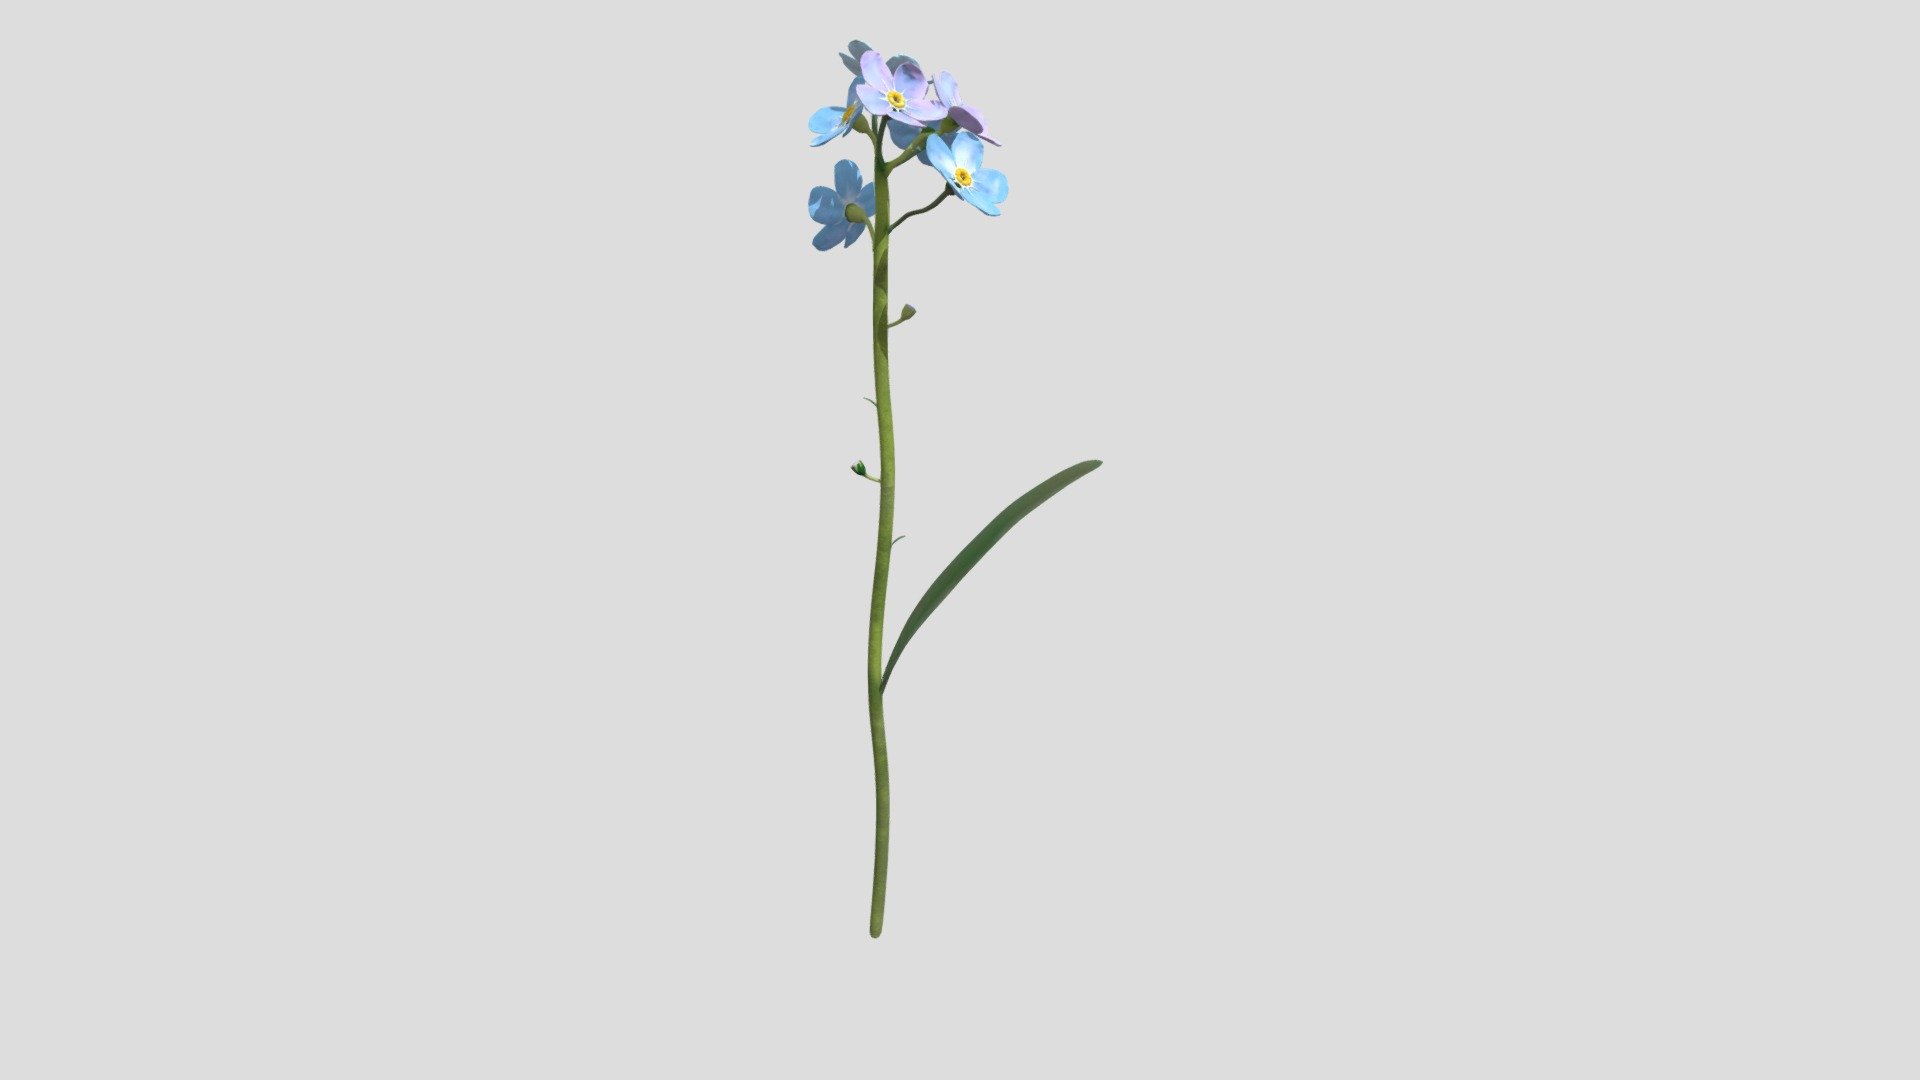 A stalk of Forget me not